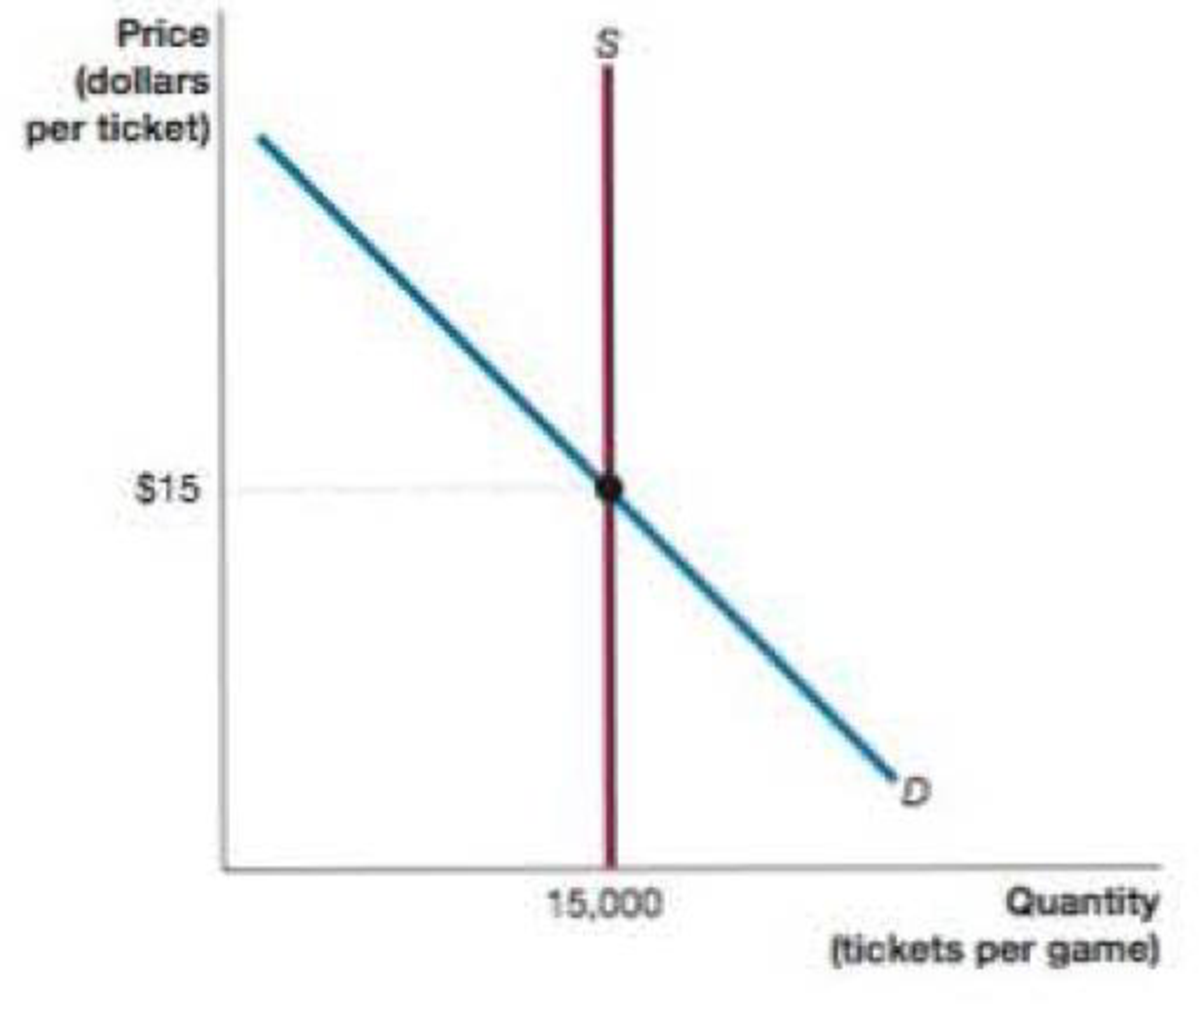 Chapter 6, Problem 6.6.10PA, Use the graph of the market for basketball tickets at State University on the next page to answer 